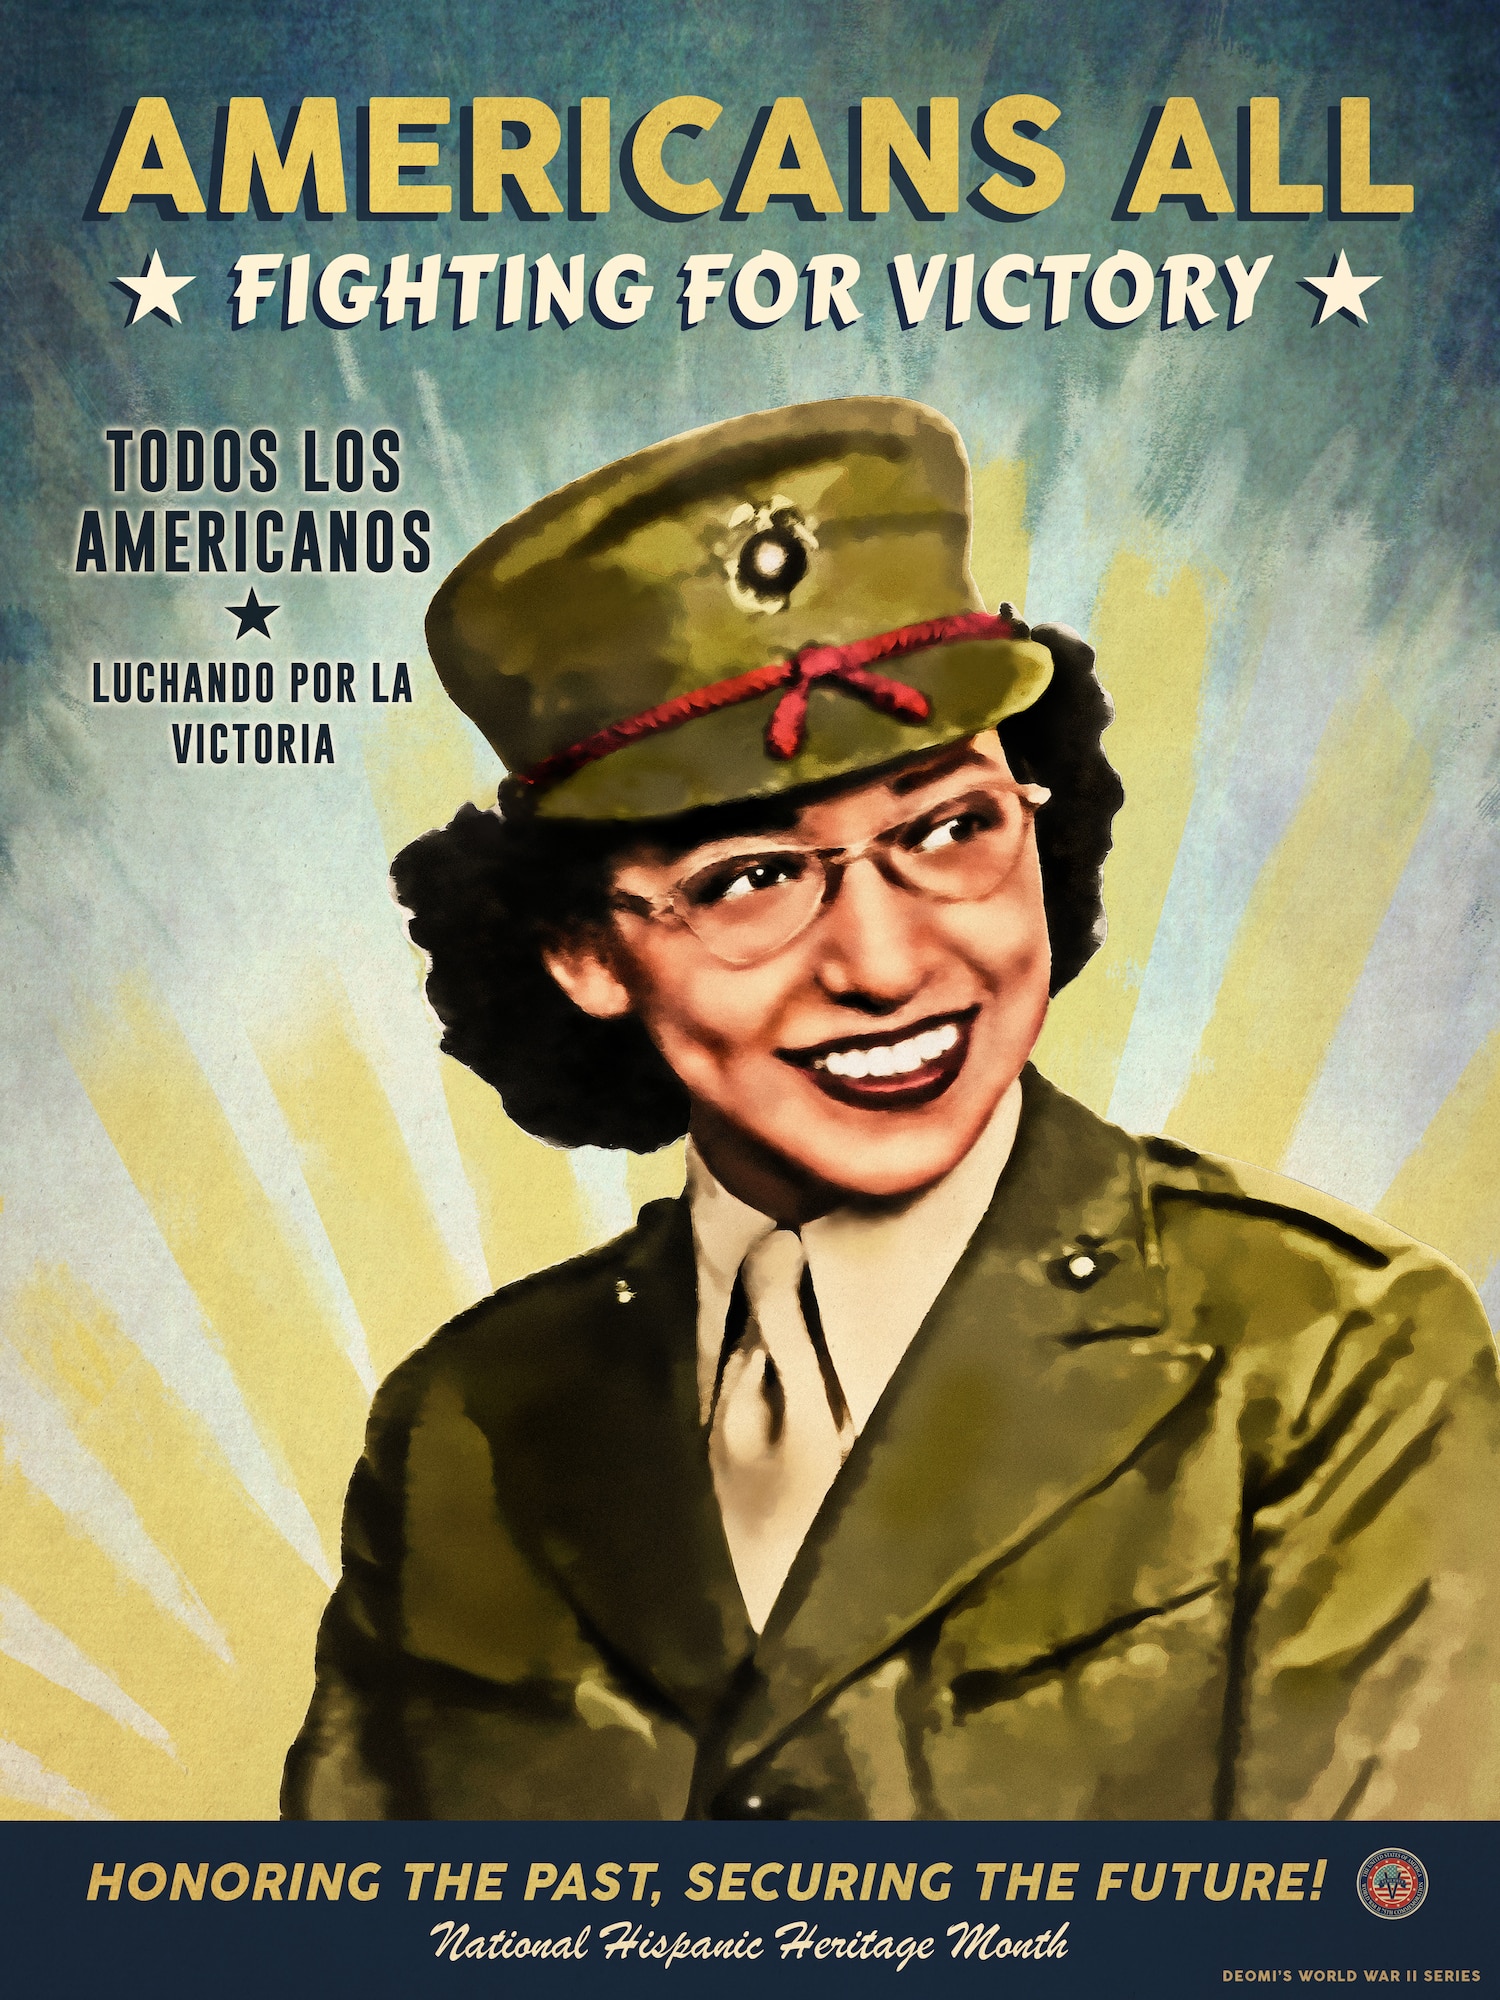 Depicted in the poster is Sergeant Consuelo Mary Hartsell. She left the service in 1946. The sisters were sent to boot camp at Camp Lejeune in North Carolina, the only sisters and the only Latinos in the camp. Both were assigned office jobs at the Depot of Supplies of the 1st Marine Division in San Francisco. Hartsell was assigned a desk job overseeing supplies shipped to and from overseas.She was awarded American Campaign and World War II victory medals, as well as recognition for her honorable service.We celebrate her in correlation with National Hispanic Heritage Month, formerly known as Hispanic Heritage Week, has been celebrated for more than 50 years and dates back to 1968. In 1988, during the President Ronald Reagan administration the observance period, that was once only a week extended to a month and received its new name. Since then, National Hispanic Heritage Month begins every 15th of September and ends the 15th of October. During this month members pay respect to the Americans who sacrificed themselves for this nation.